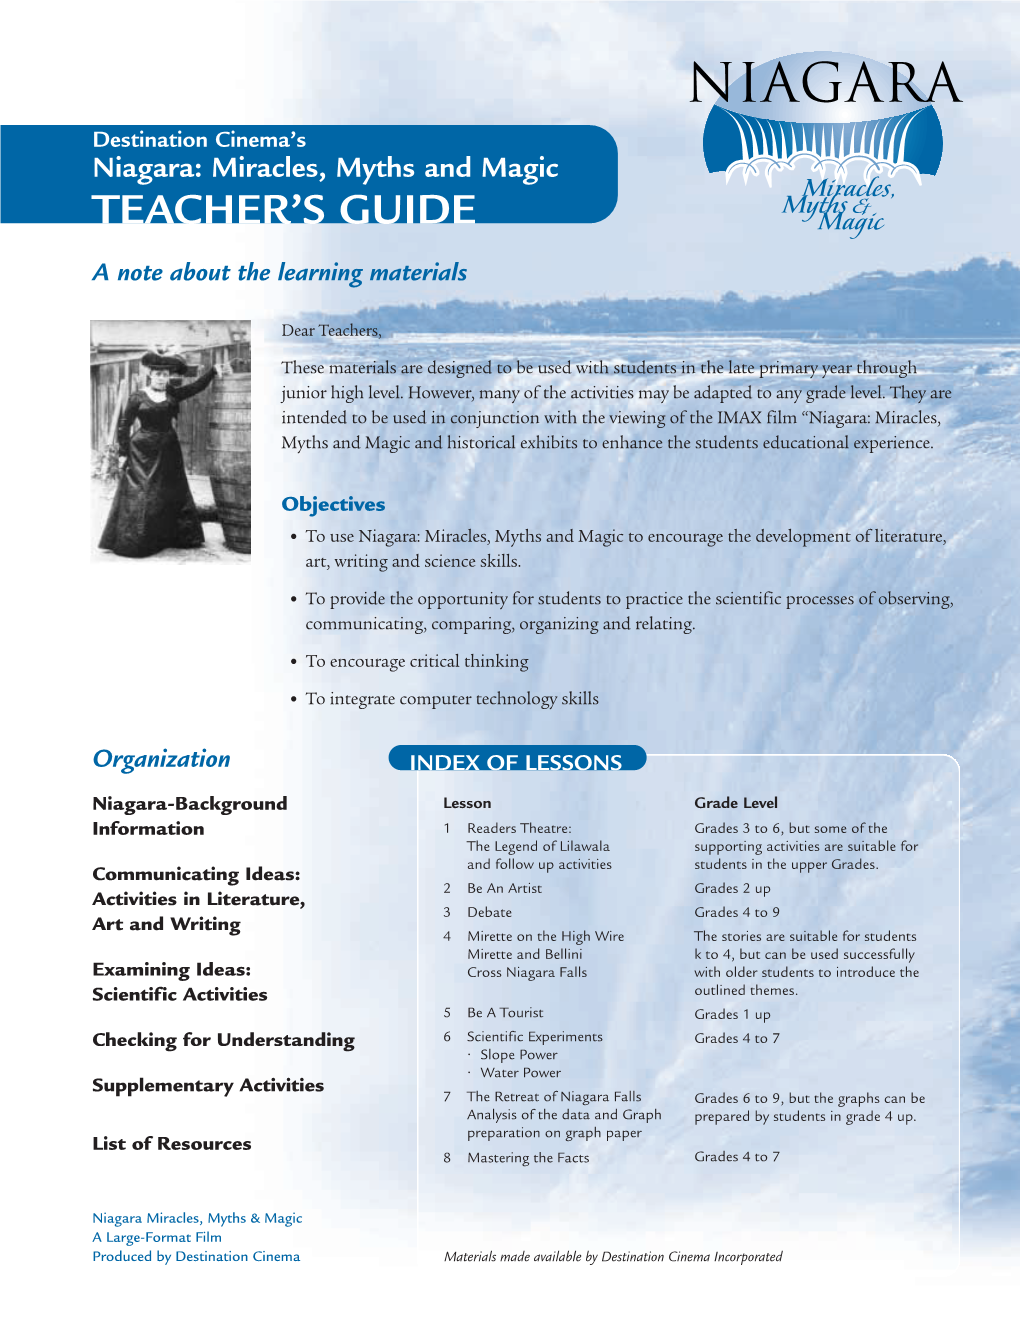 Niagara: Miracles, Myths and Magic TEACHER’S GUIDE a Note About the Learning Materials